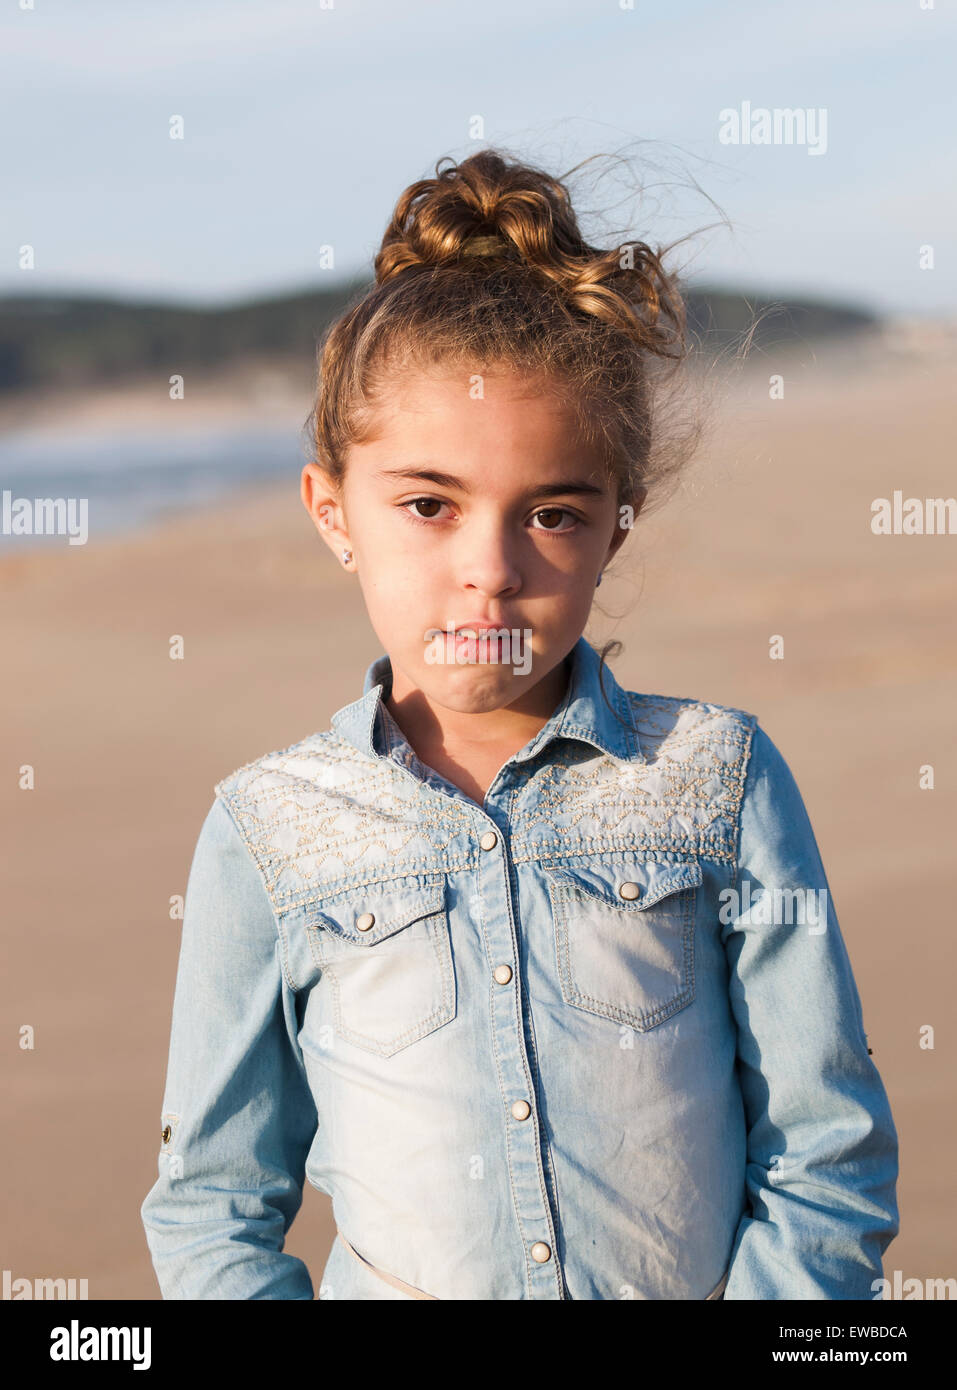 Spain, Galicia, Ferrol, Little girl portrait in the beach with sunset light Stock Photo